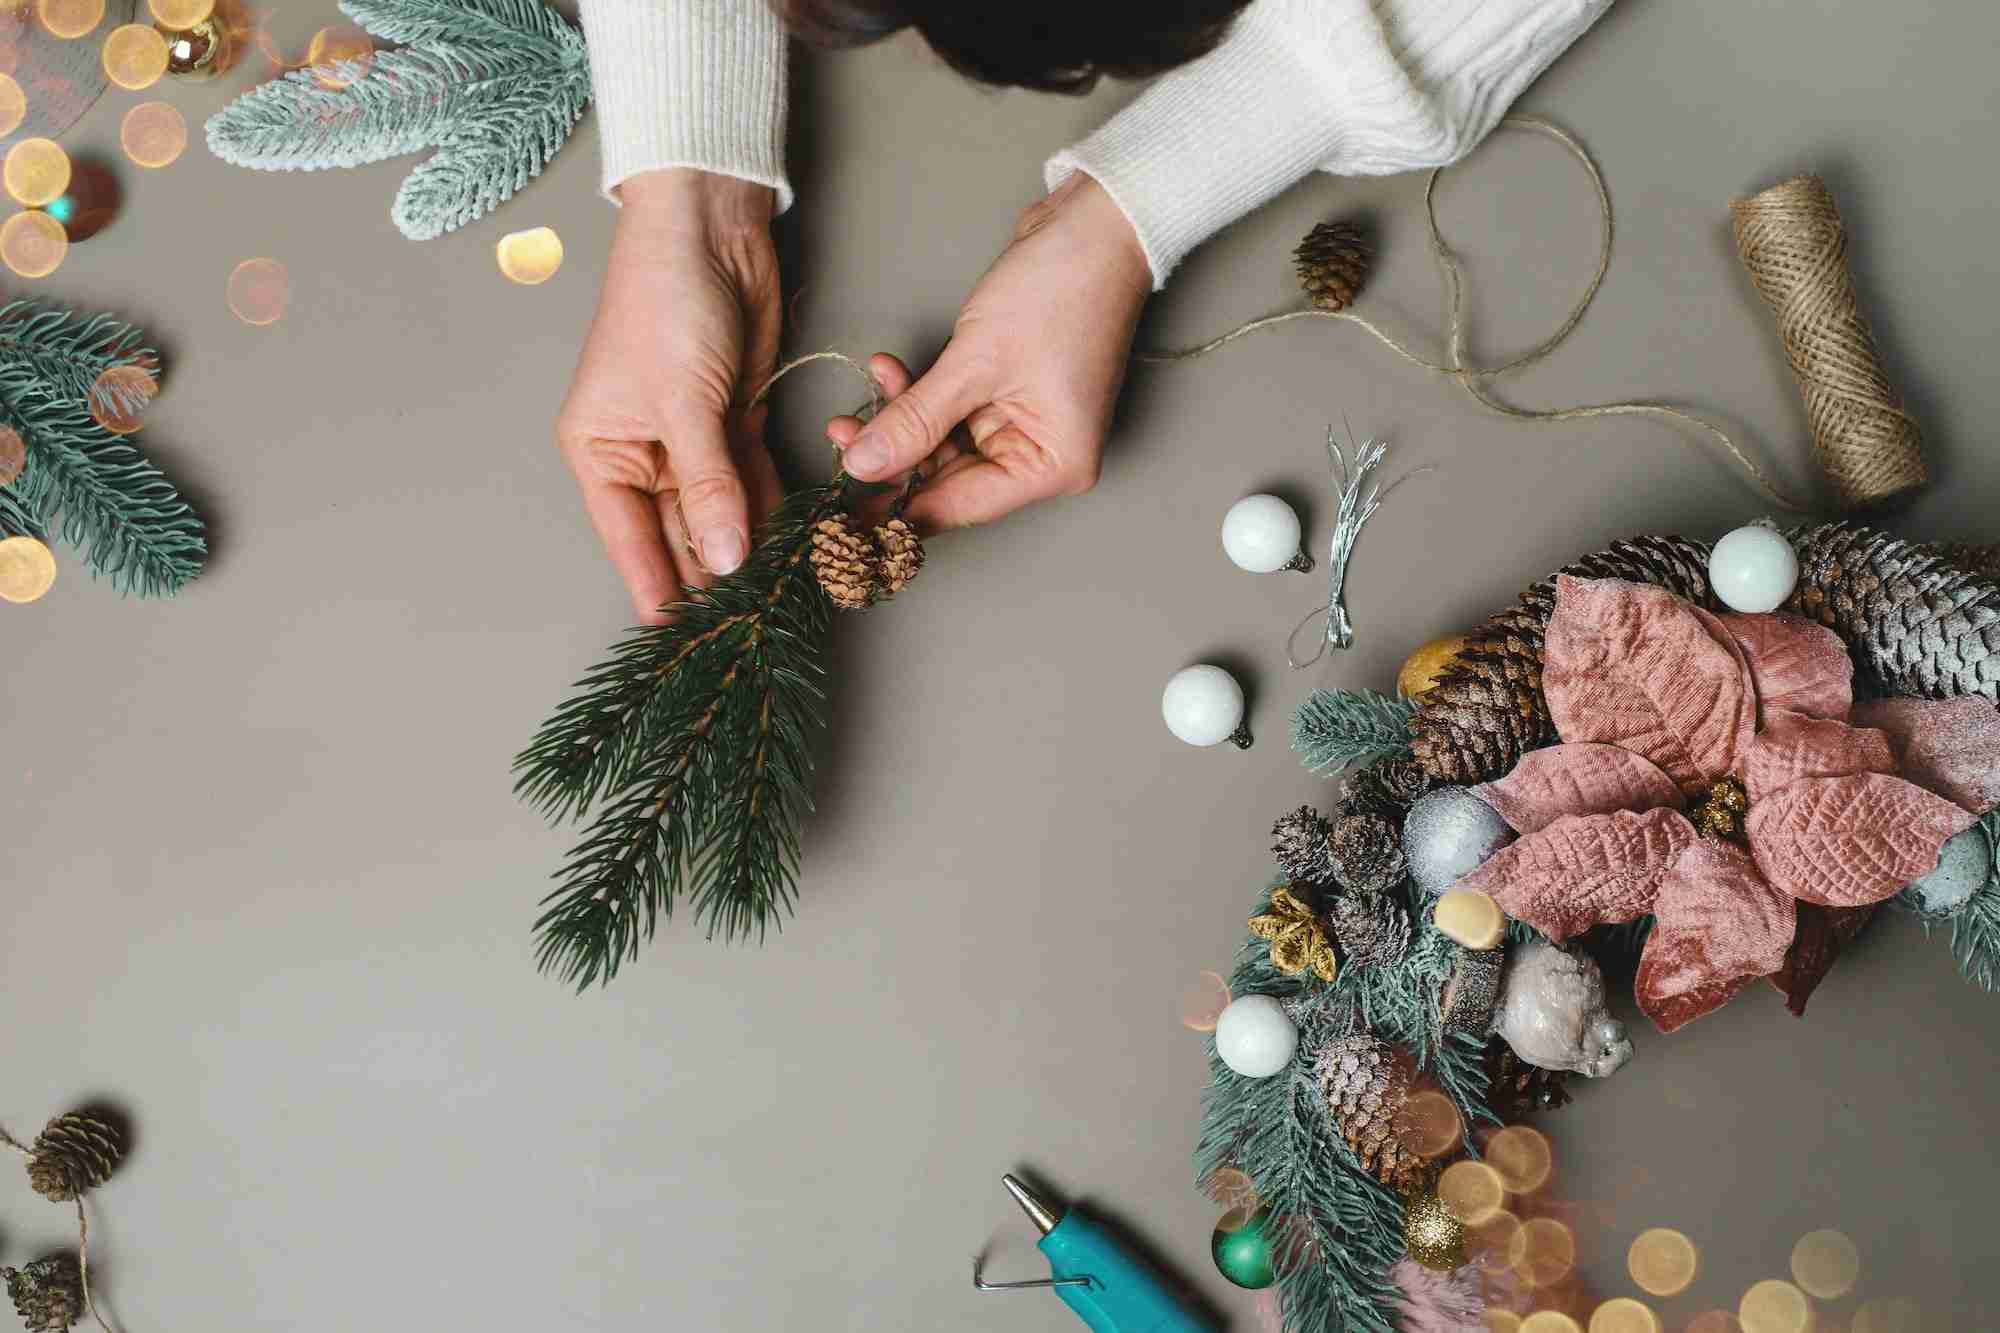 Hands making Christmas wreath with fir branches, Flat lay.